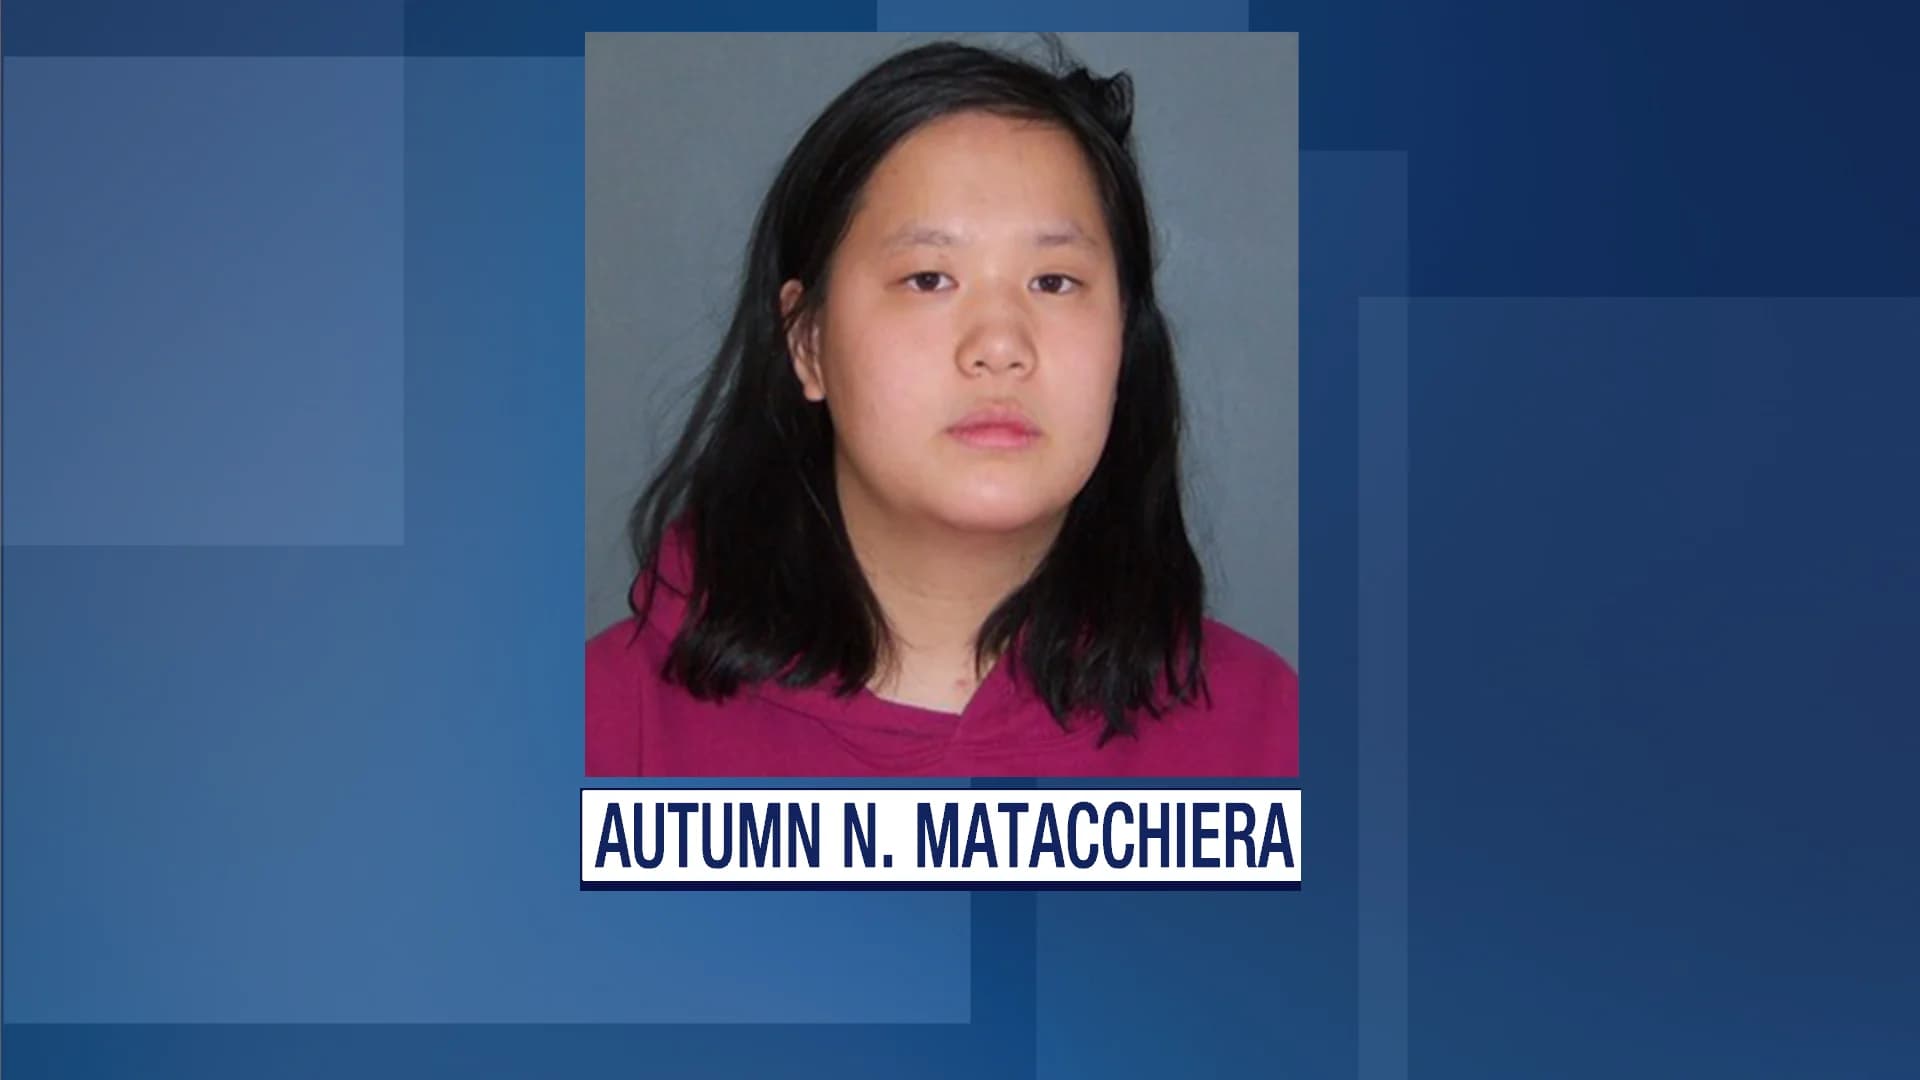 Woman indicted for allegedly throwing child in front of train